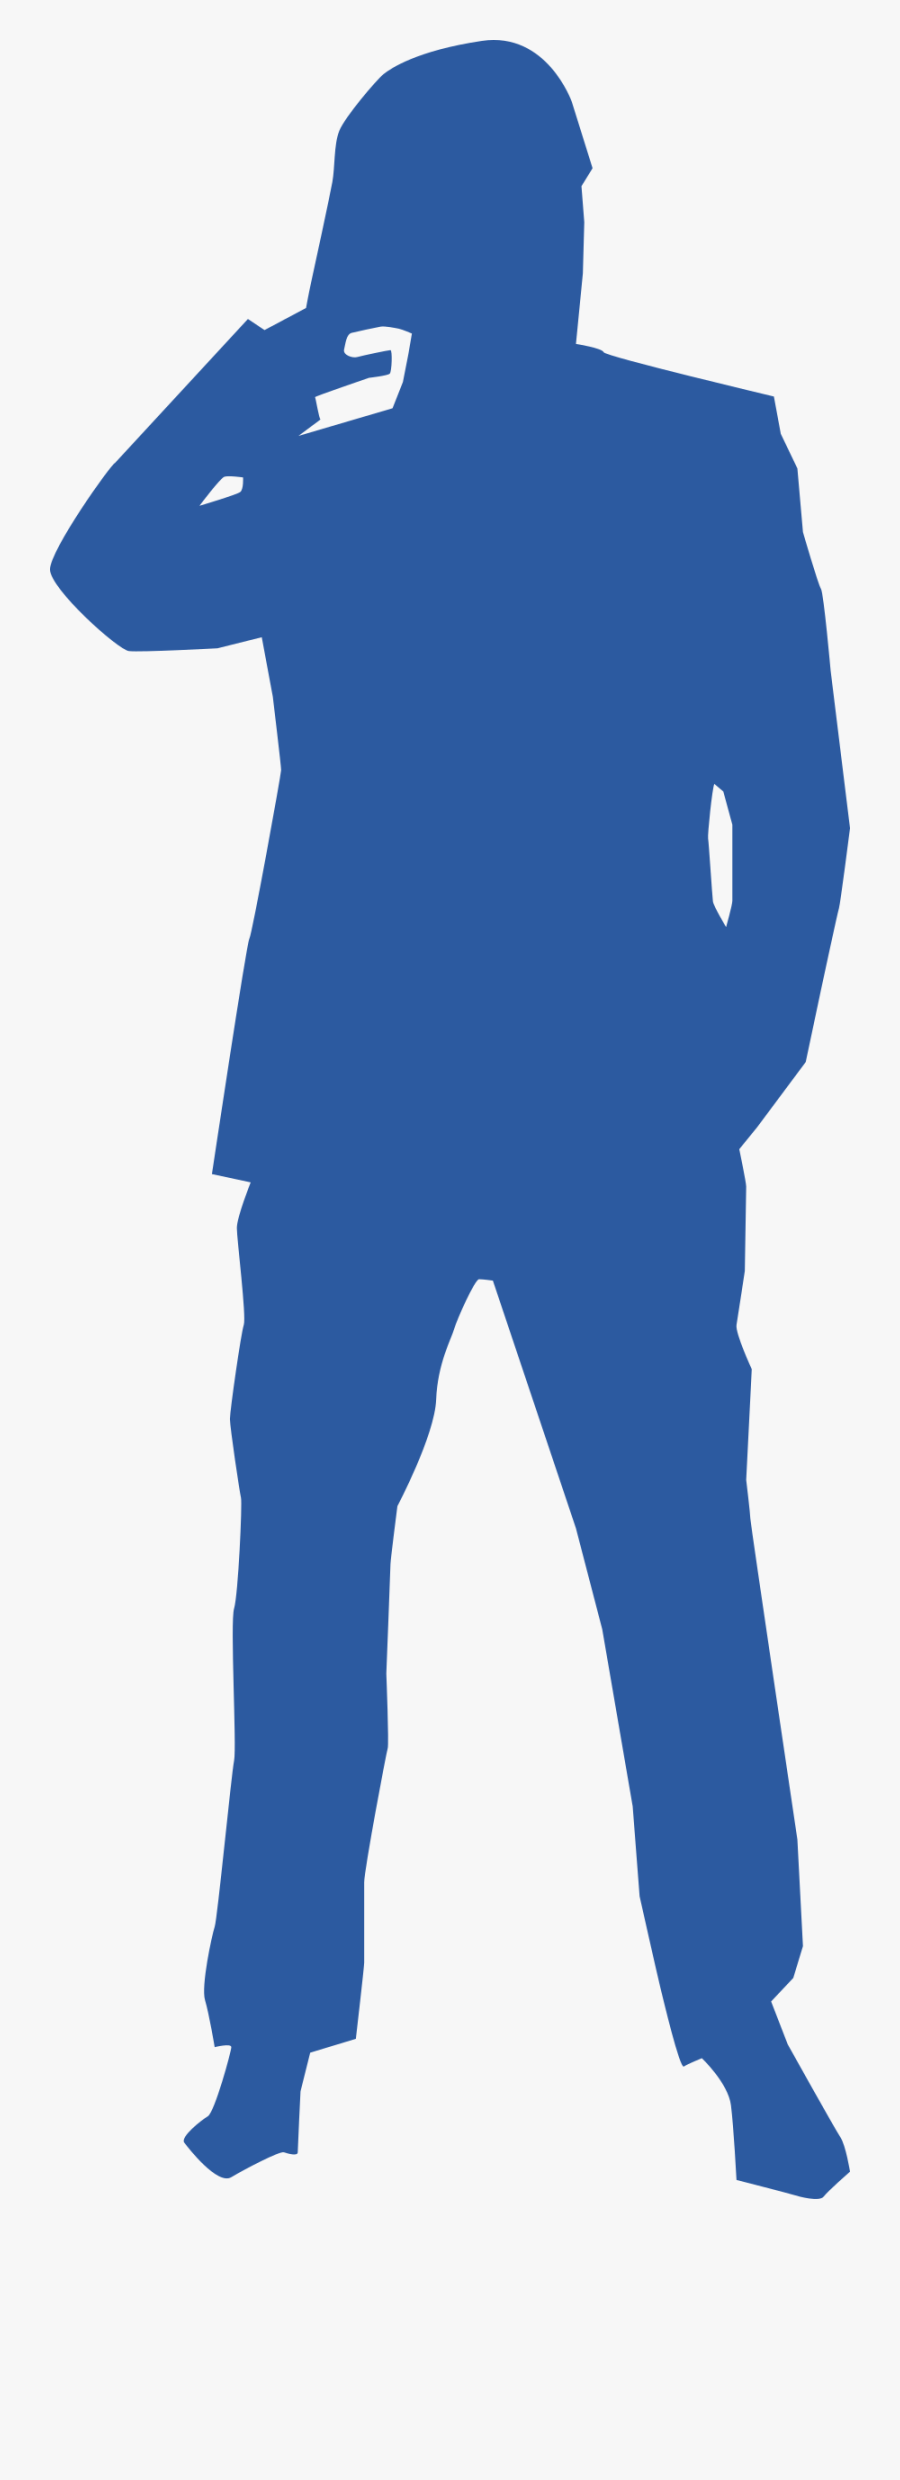 This Free Icons Png Design Of Thinking Man Silhouette - Man Silhouette Png Blue, Transparent Clipart